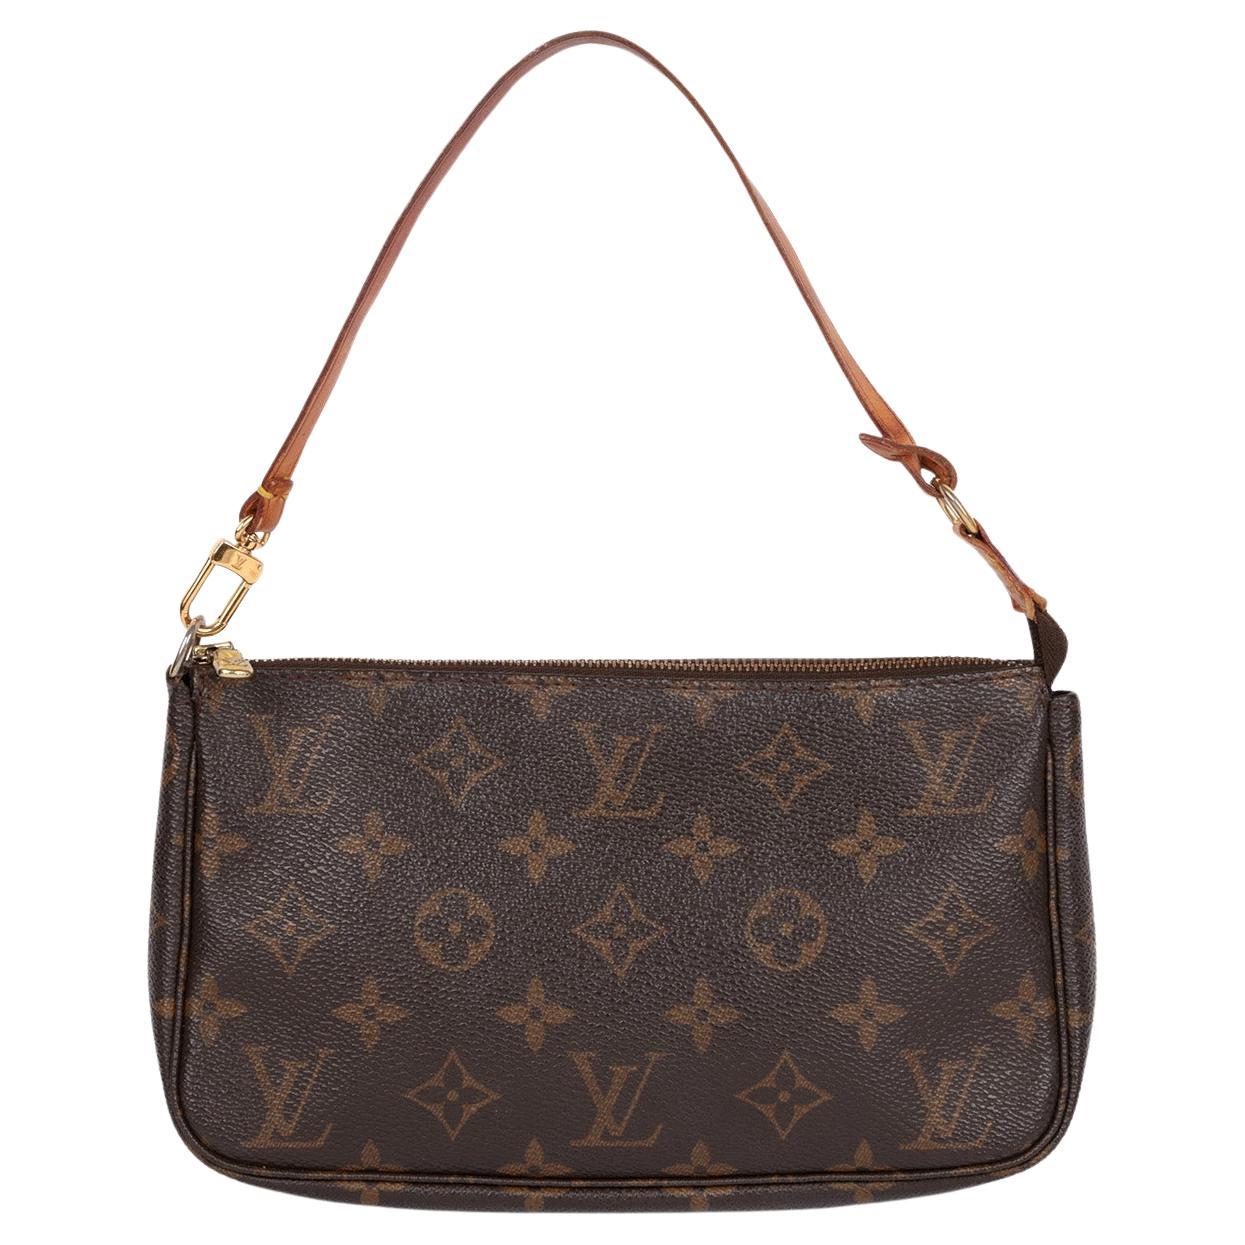 How do I read a date code on Louis Vuitton?